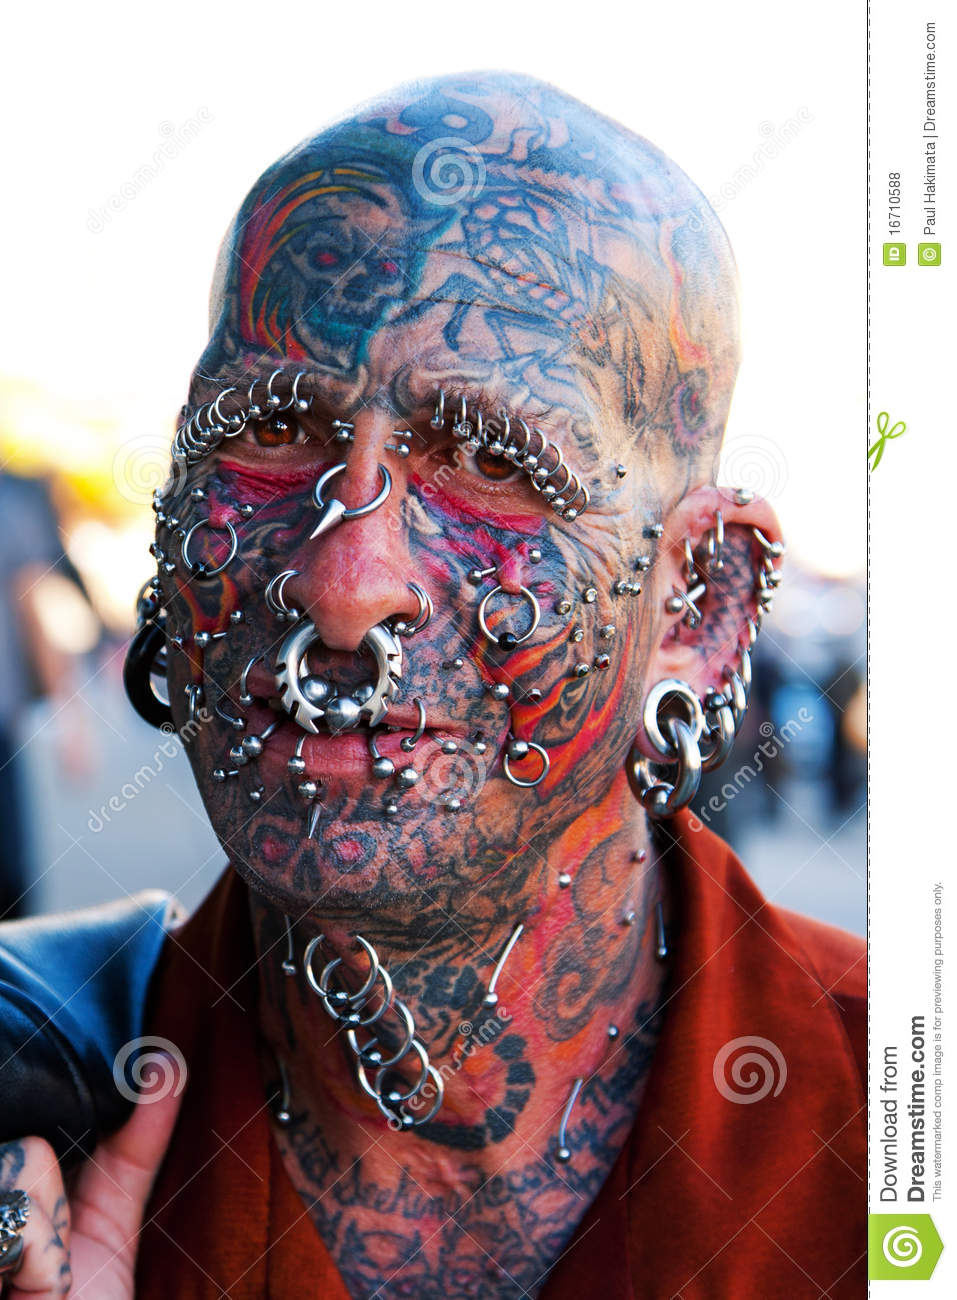 tattoo and piercings - dreamstime sensitio Men dreamstime Id 16710588 Download from Dreamstime.com This watermarked comp image is for previewing purposes only. Paul Hakimata Dreamstime.com